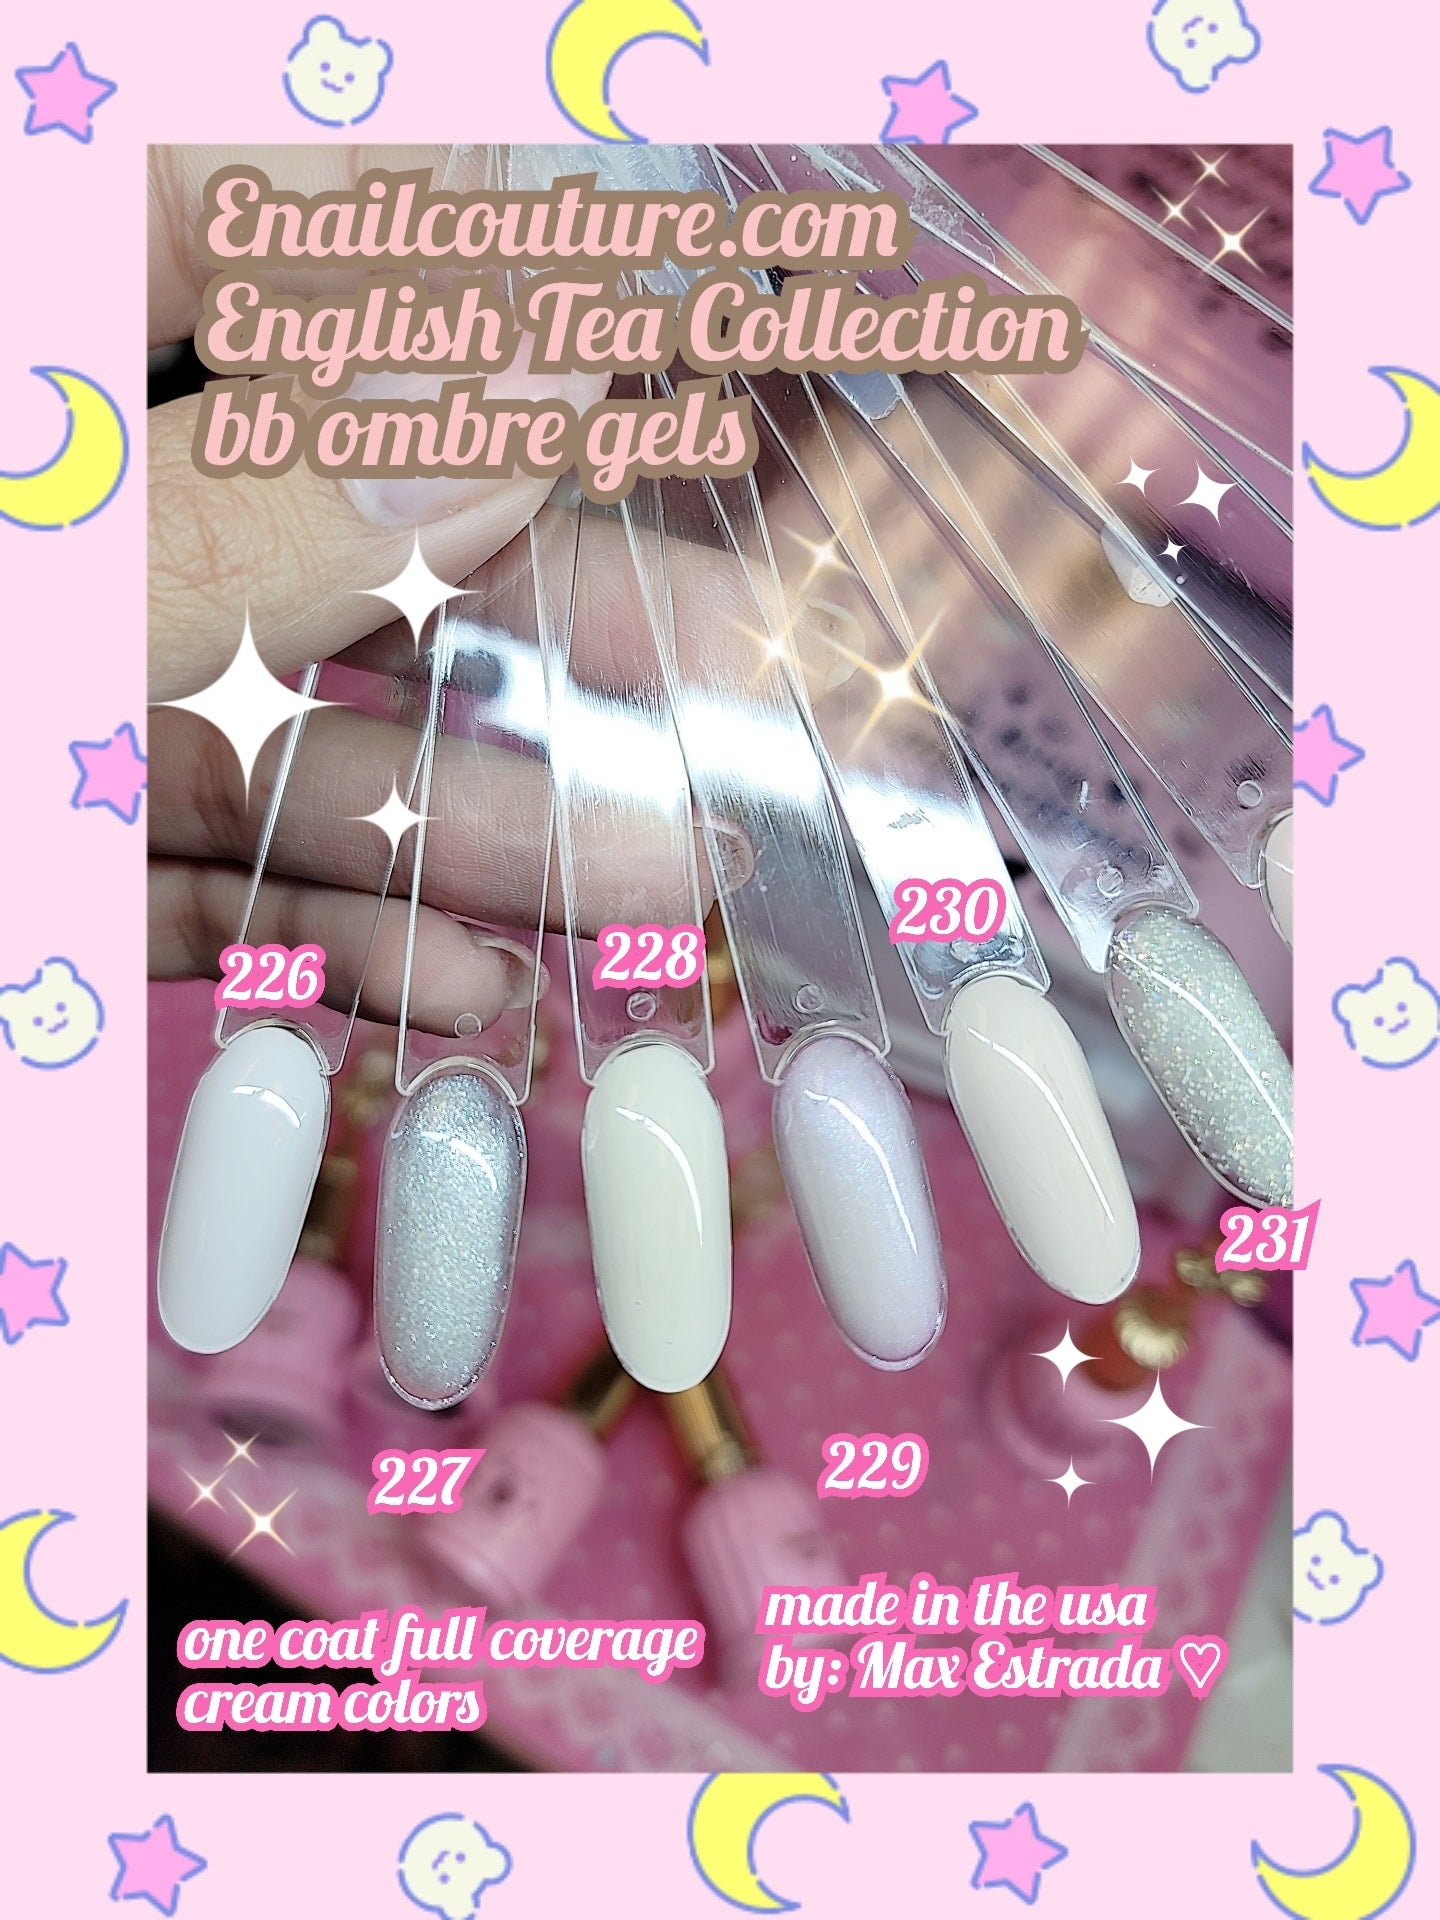 English Tea Collection- Cream Nude Gels!~ bb ombre